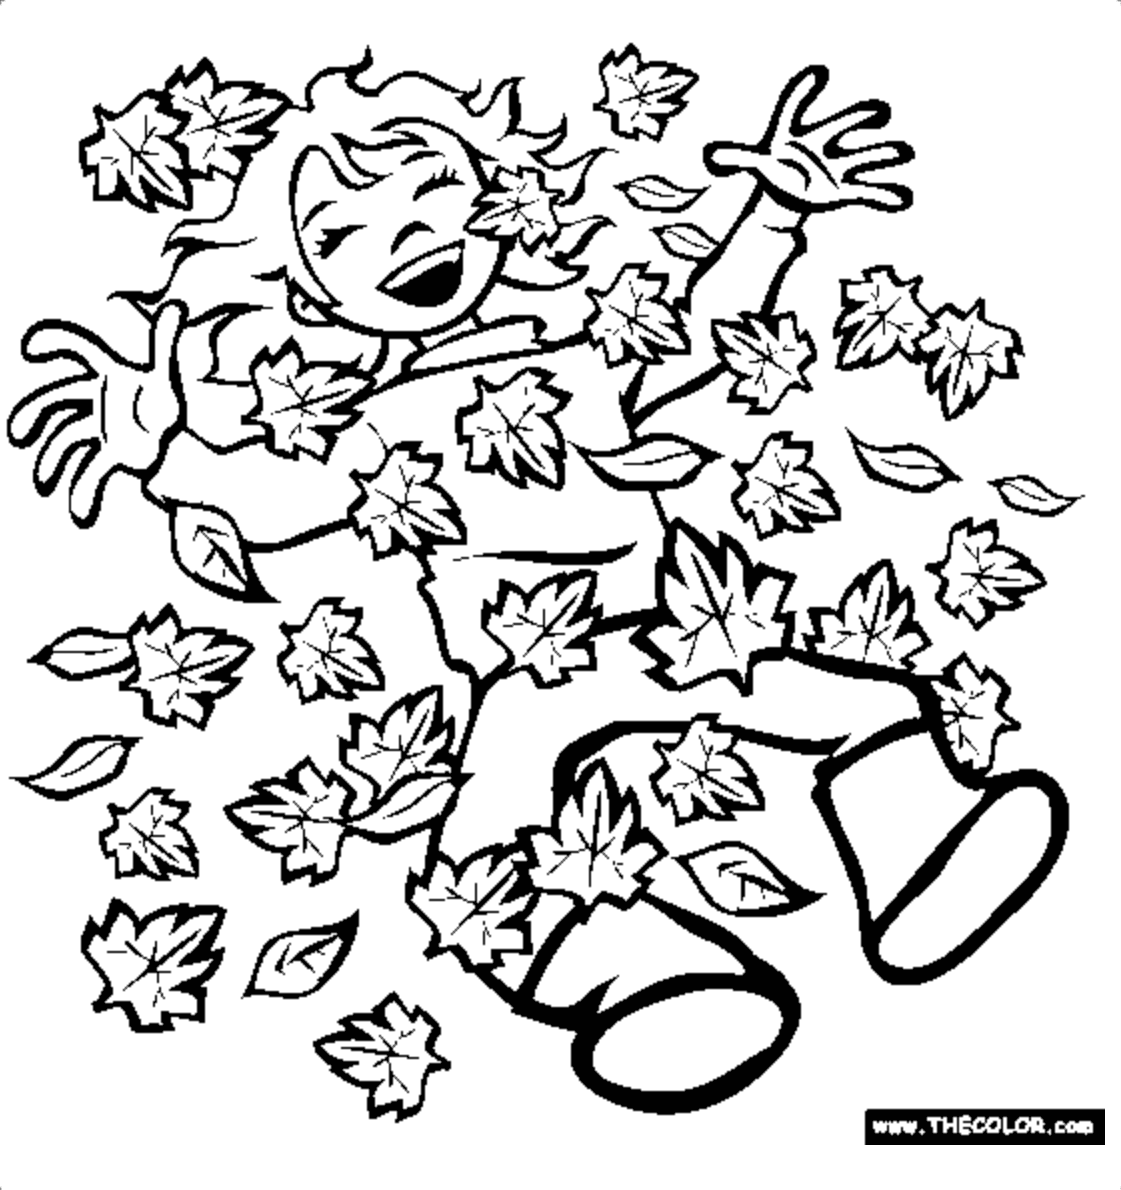 Places to find free autumn and fall coloring pages